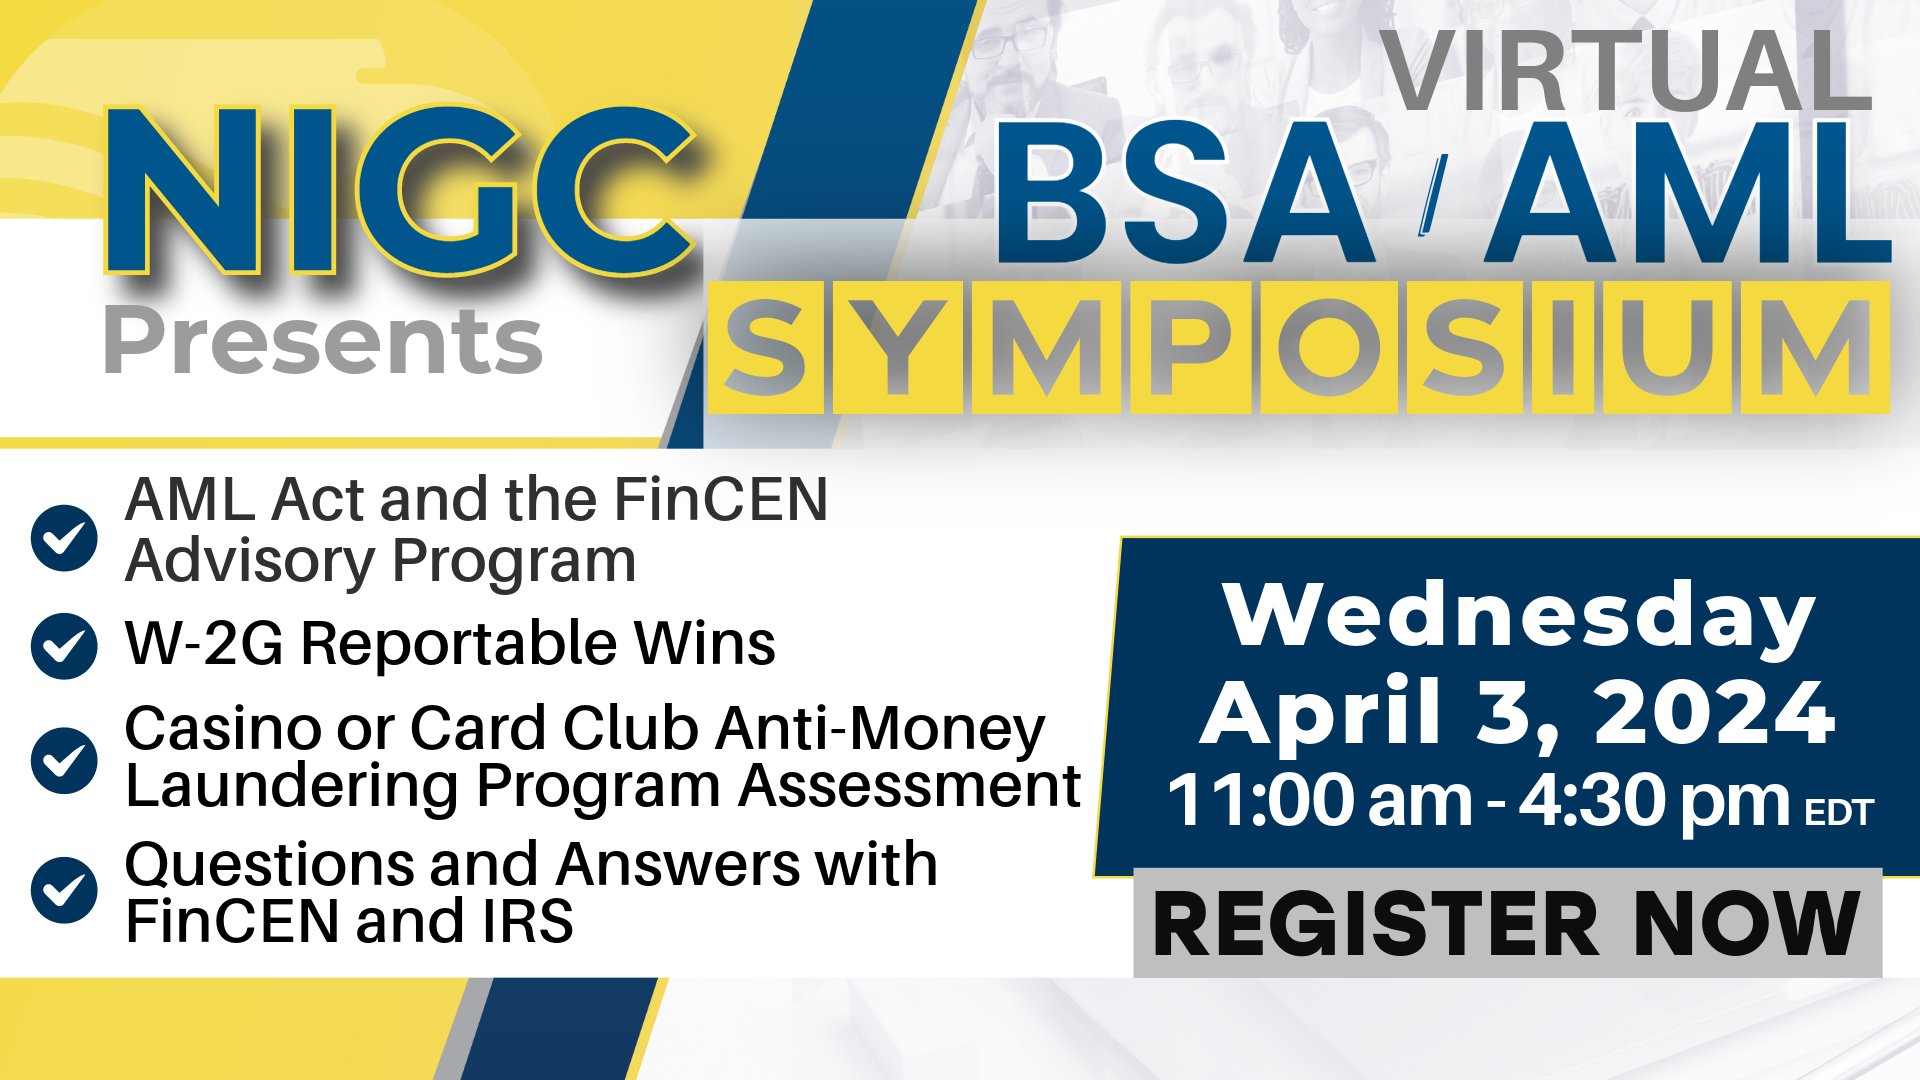 Virtual BSA/AML Symposium | Questions and Answers with FinCen and IRS